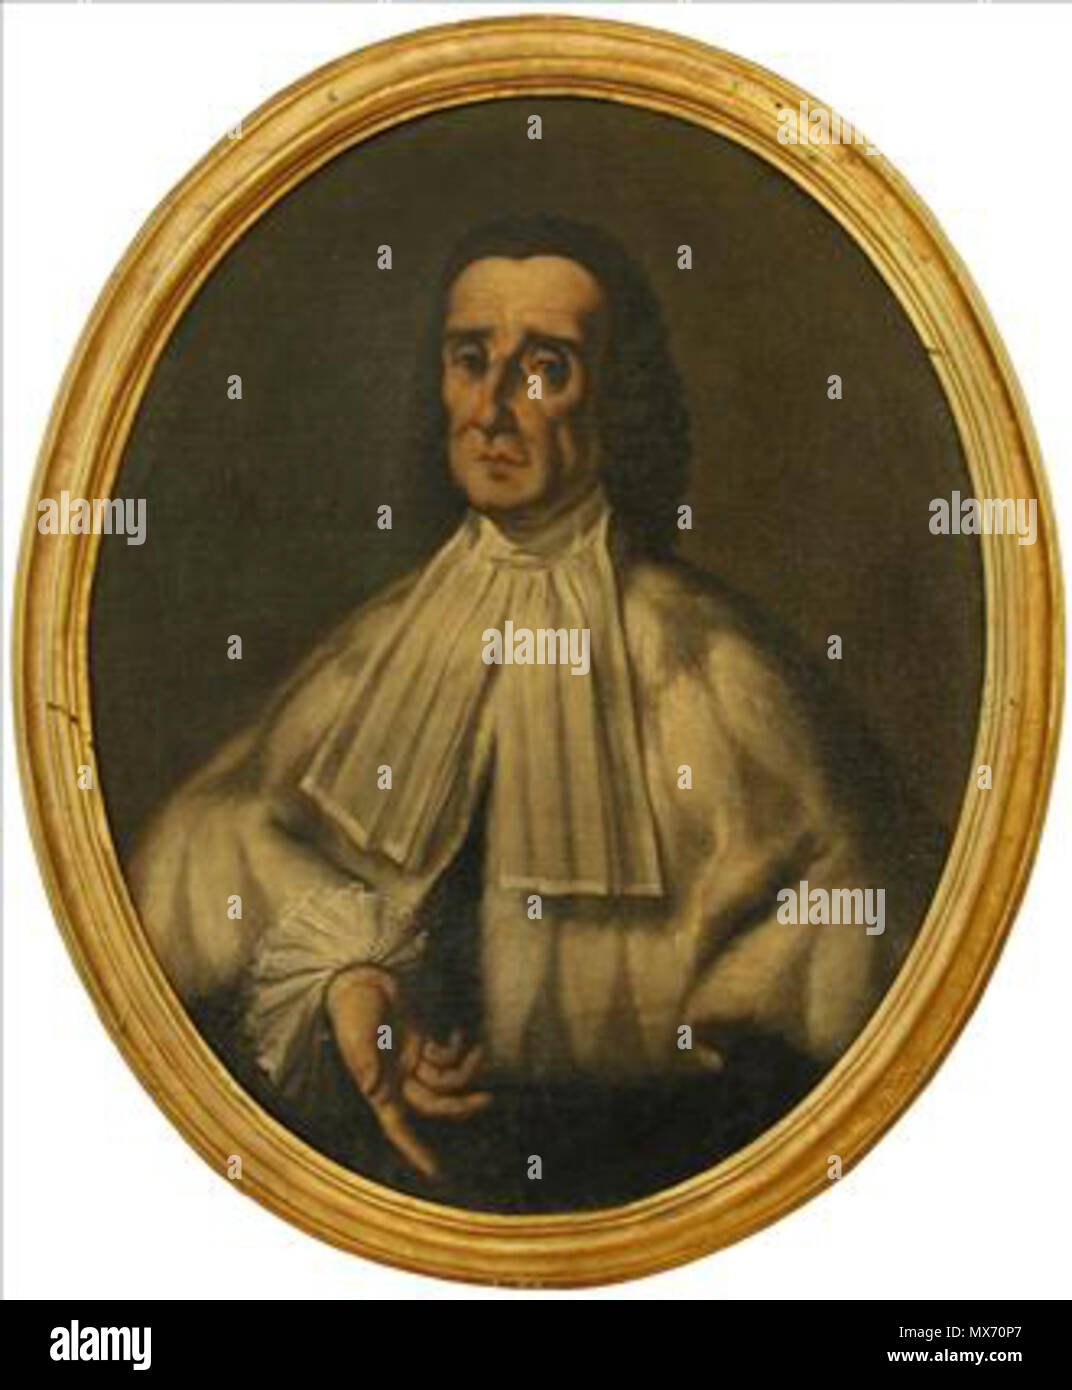 . English: Jacopo Bartolomeo Beccari (25 July 1682 - 18 January 1766 ), an Italian chemist, one of the leading scientists in Bologna in the first half of the eighteenth century. He is mainly known as the discoverer of the gluten in wheat flour. before 1767. University of Bologna 73 Bartolomeo Beccari Stock Photo